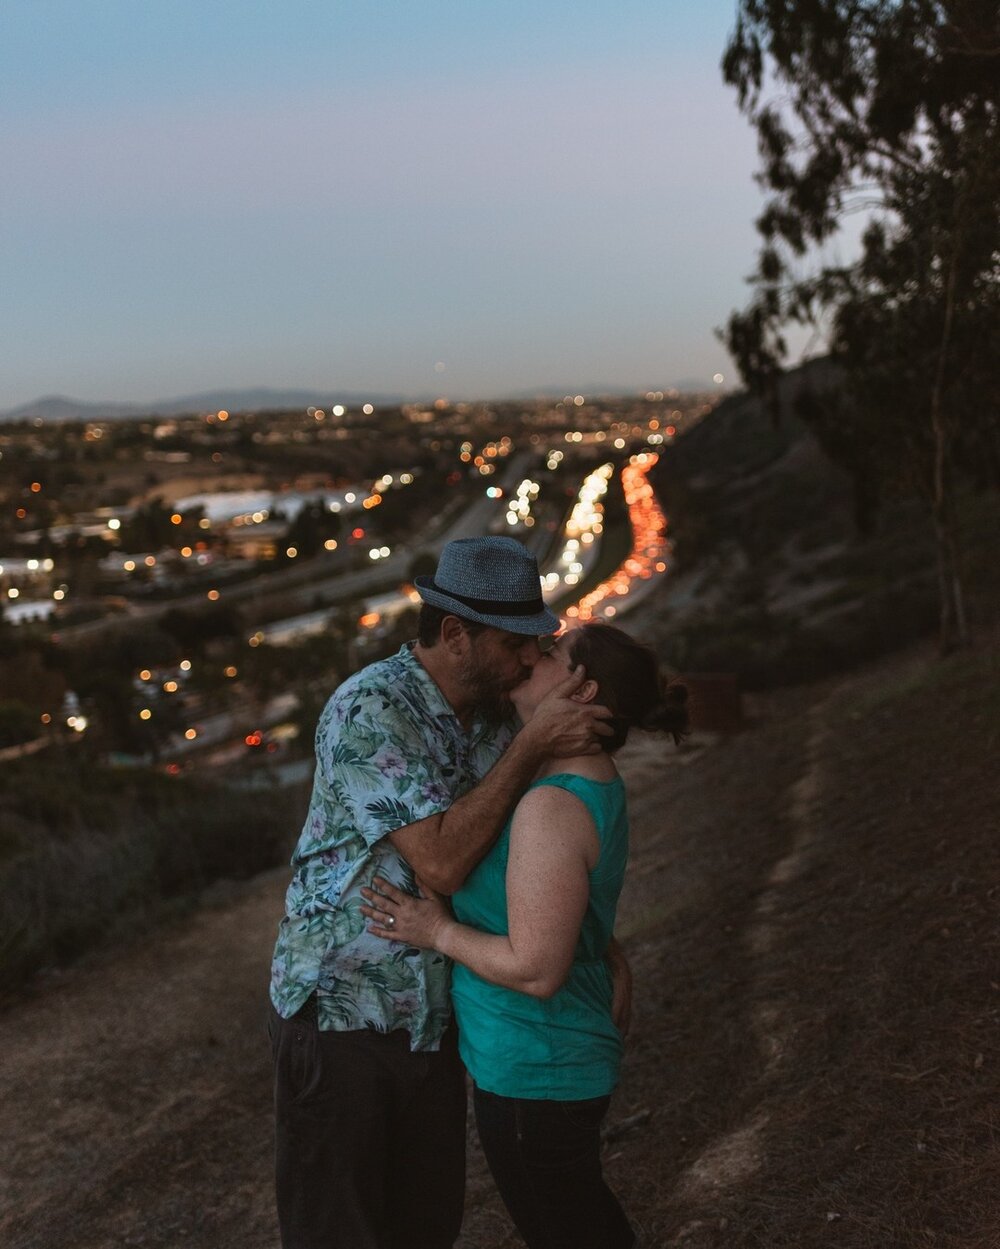 Who needs a date night out on the town when your home over looks the city lights. It's like a personal paradise. 😍

#housewithaview #sandiegocouplesession #sandiegoelopementphotography #sandiegoelopementphotographer #sandiegocouples #mtsoledadview #